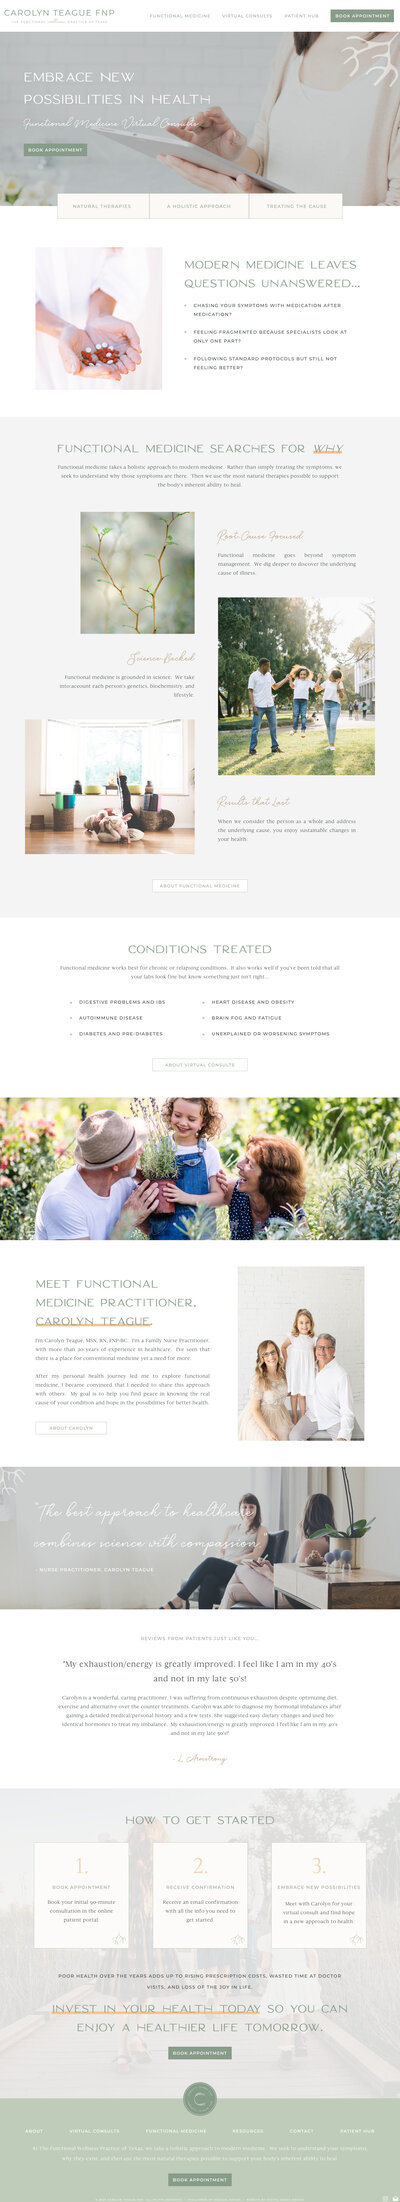 Custom Showit Website for Carolyn Teague FNP, a functional wellness nurse practitioner in Texas